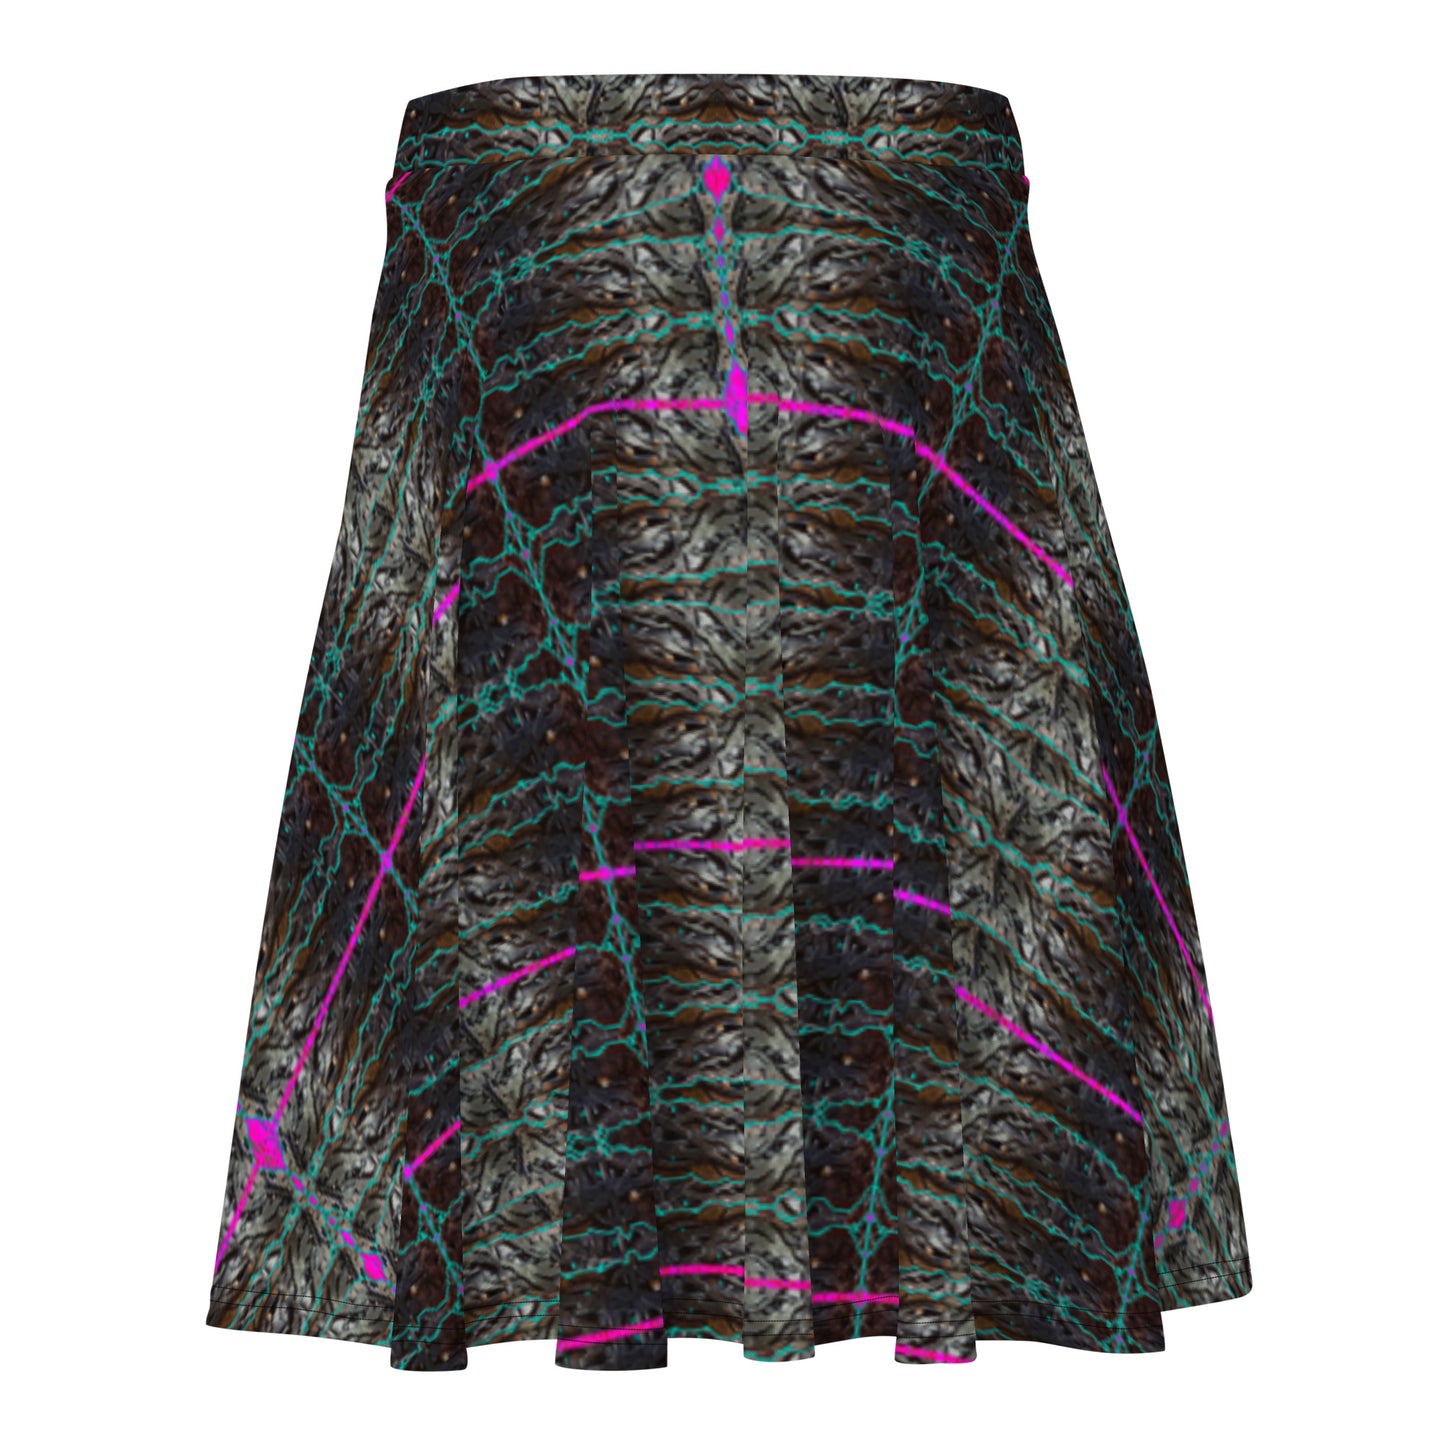 Skater Skirt (Her/They)(Rind#8 Tree Link) RJSTH@Fabric#8 RJSTHW2021 RJS